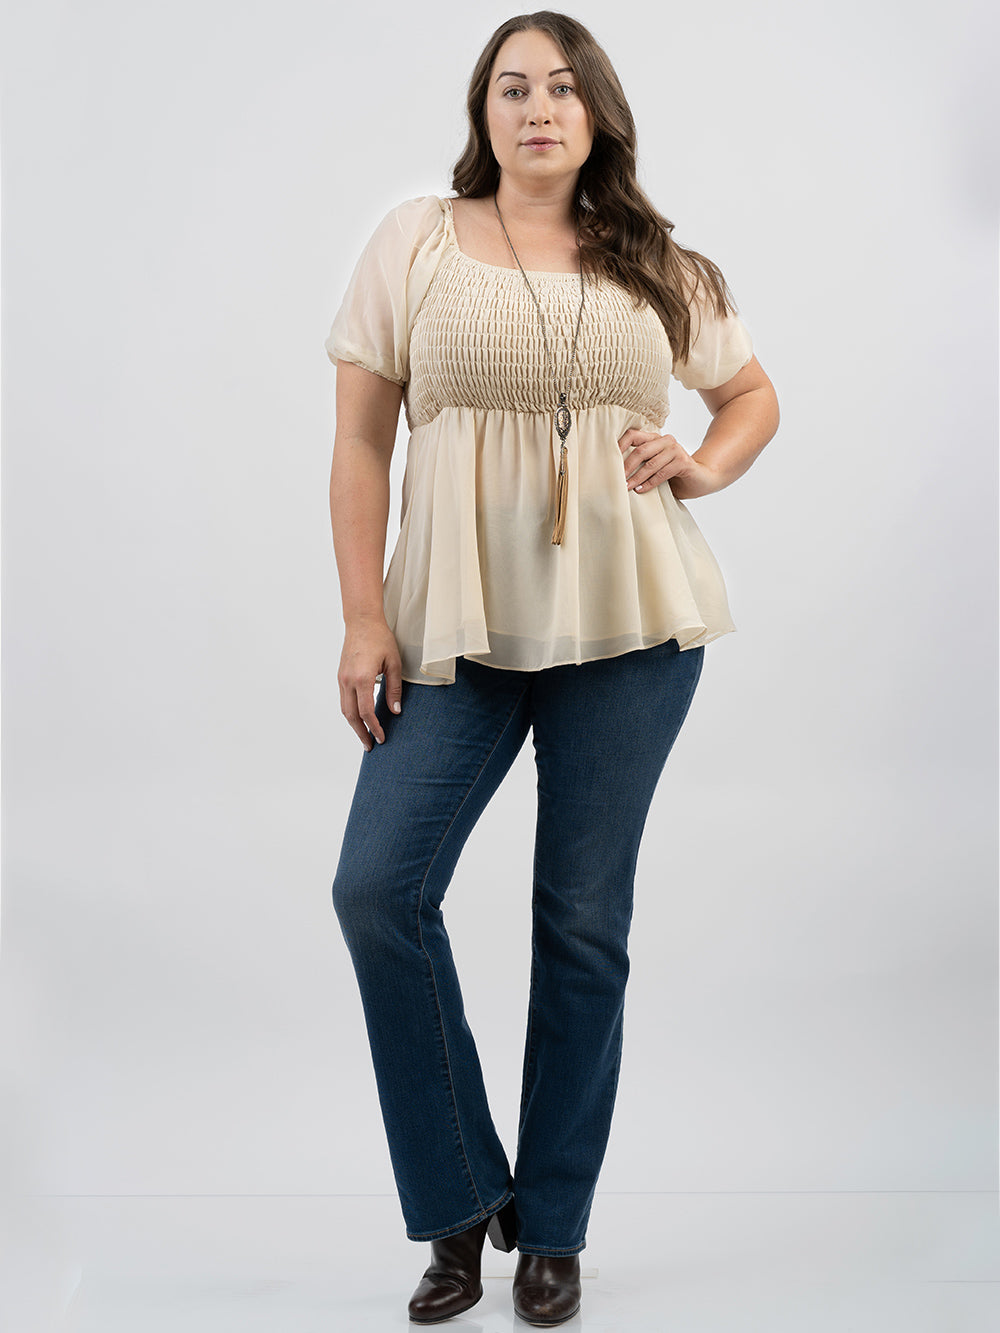 American Bling Plus Size Women Ruched Tiered Long Sleeve Top - Montana West World